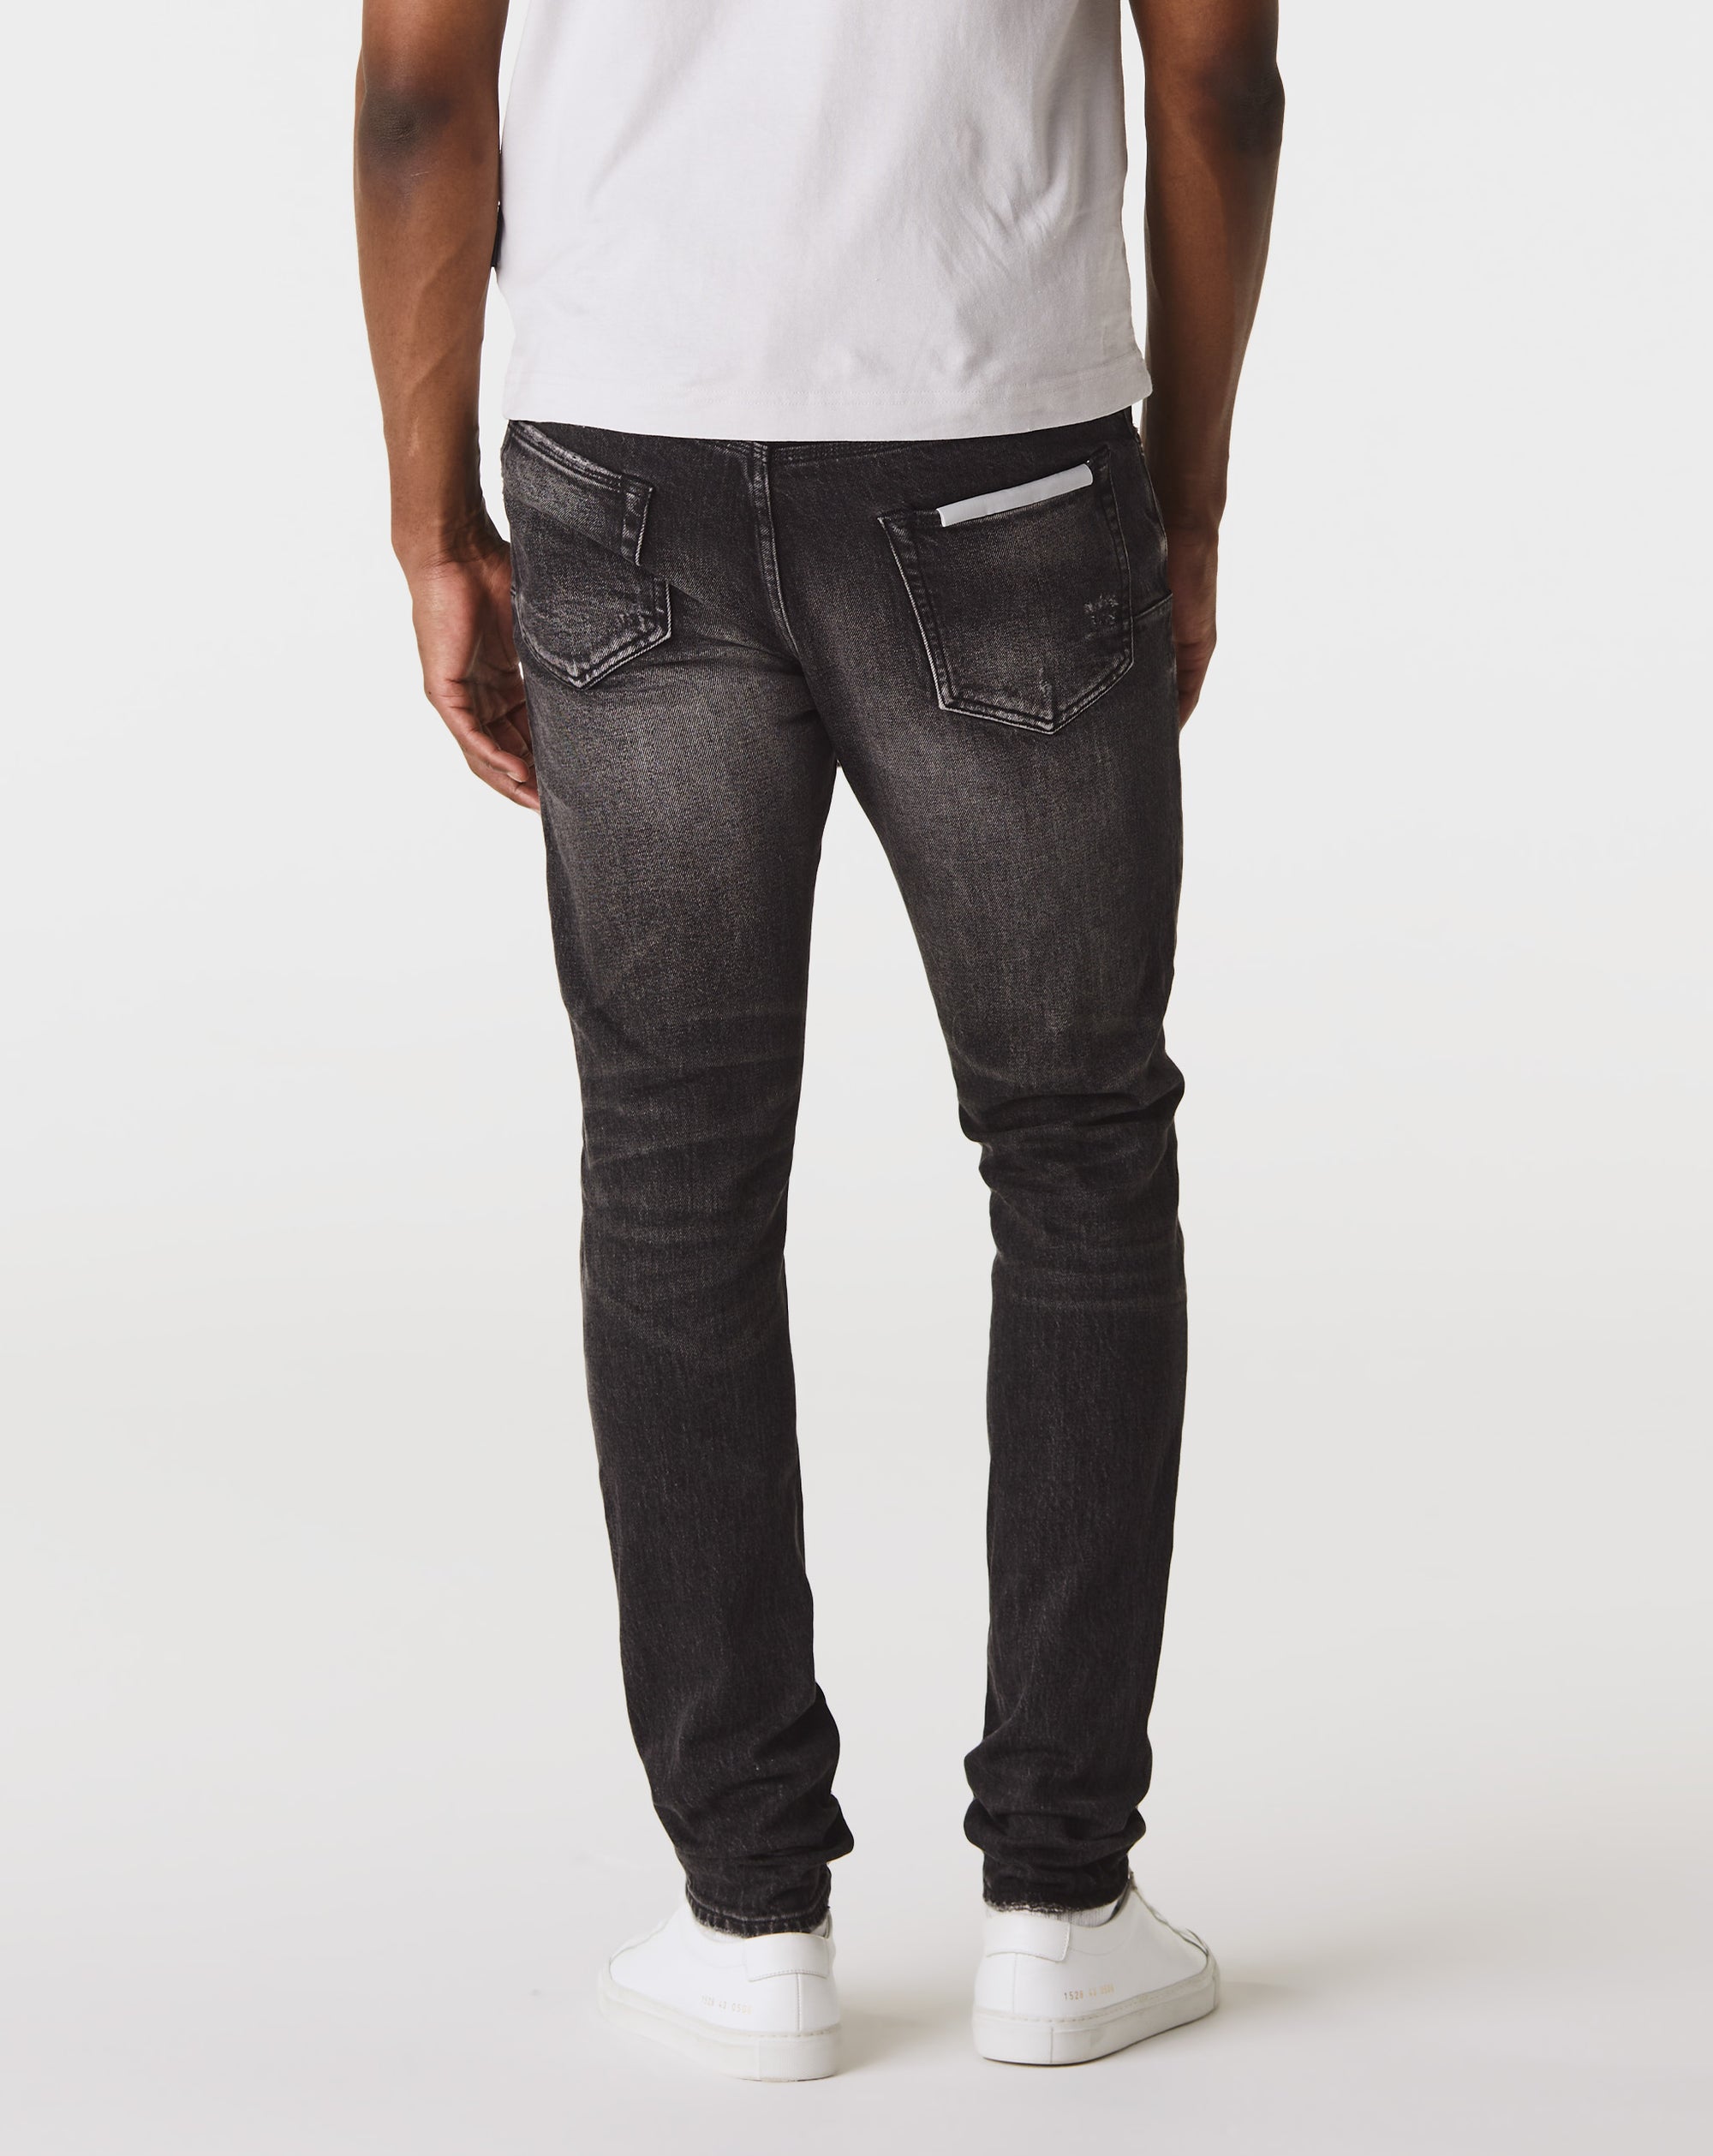 P001 Low Rise Slim Jeans - Rule of Next